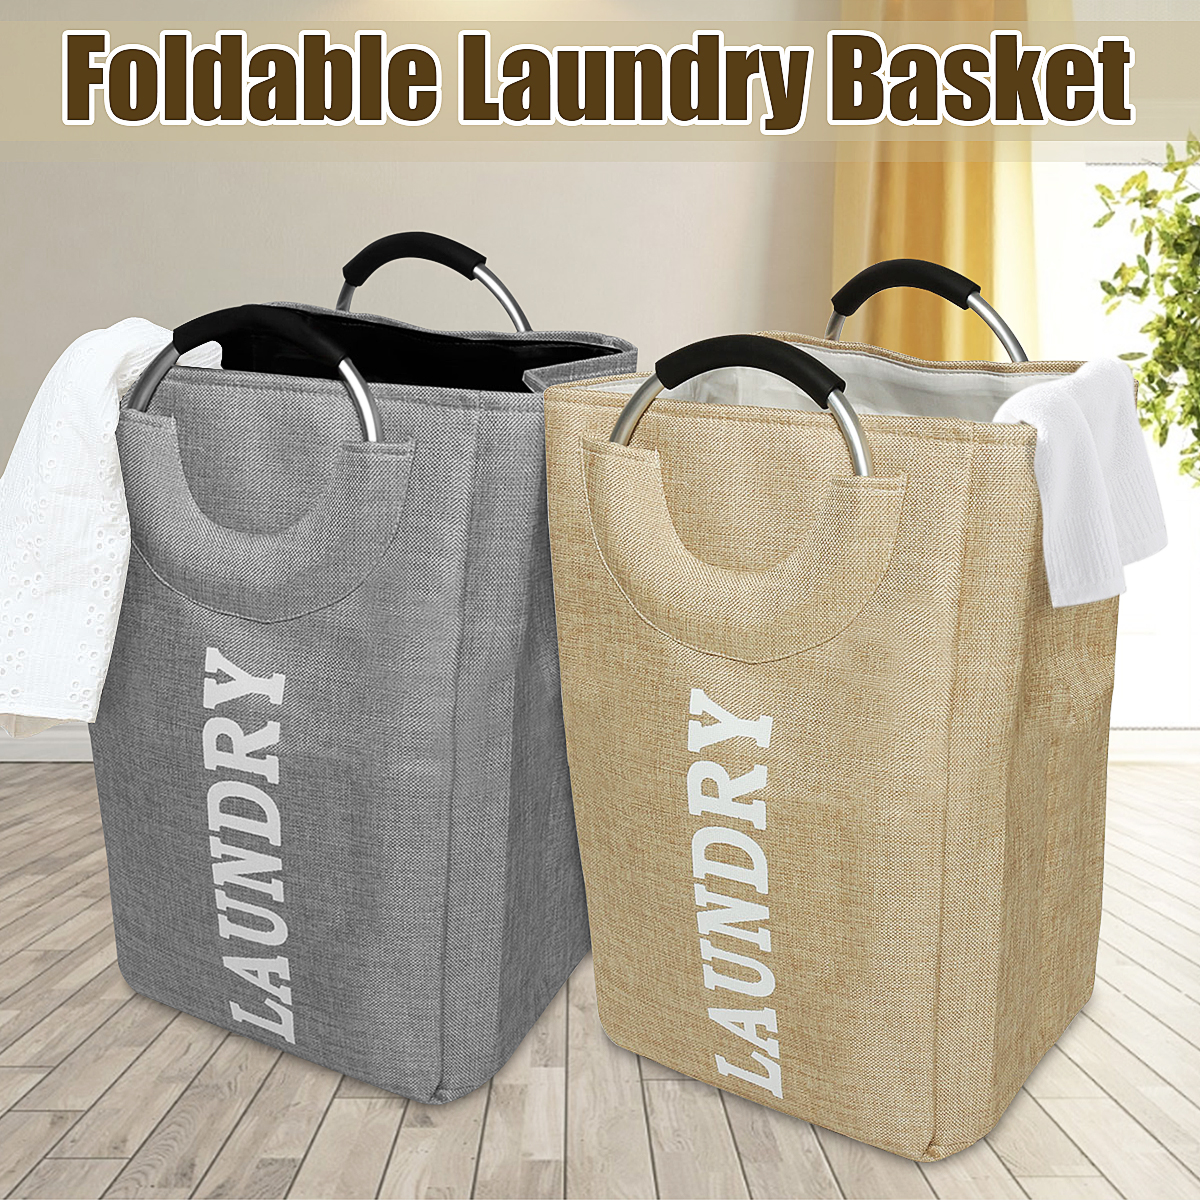 Portable-Foldable-Oxford-Laundry-Washing-Dirty-Clothes-Storage-Baskets-Bag-Hamper-1642044-1